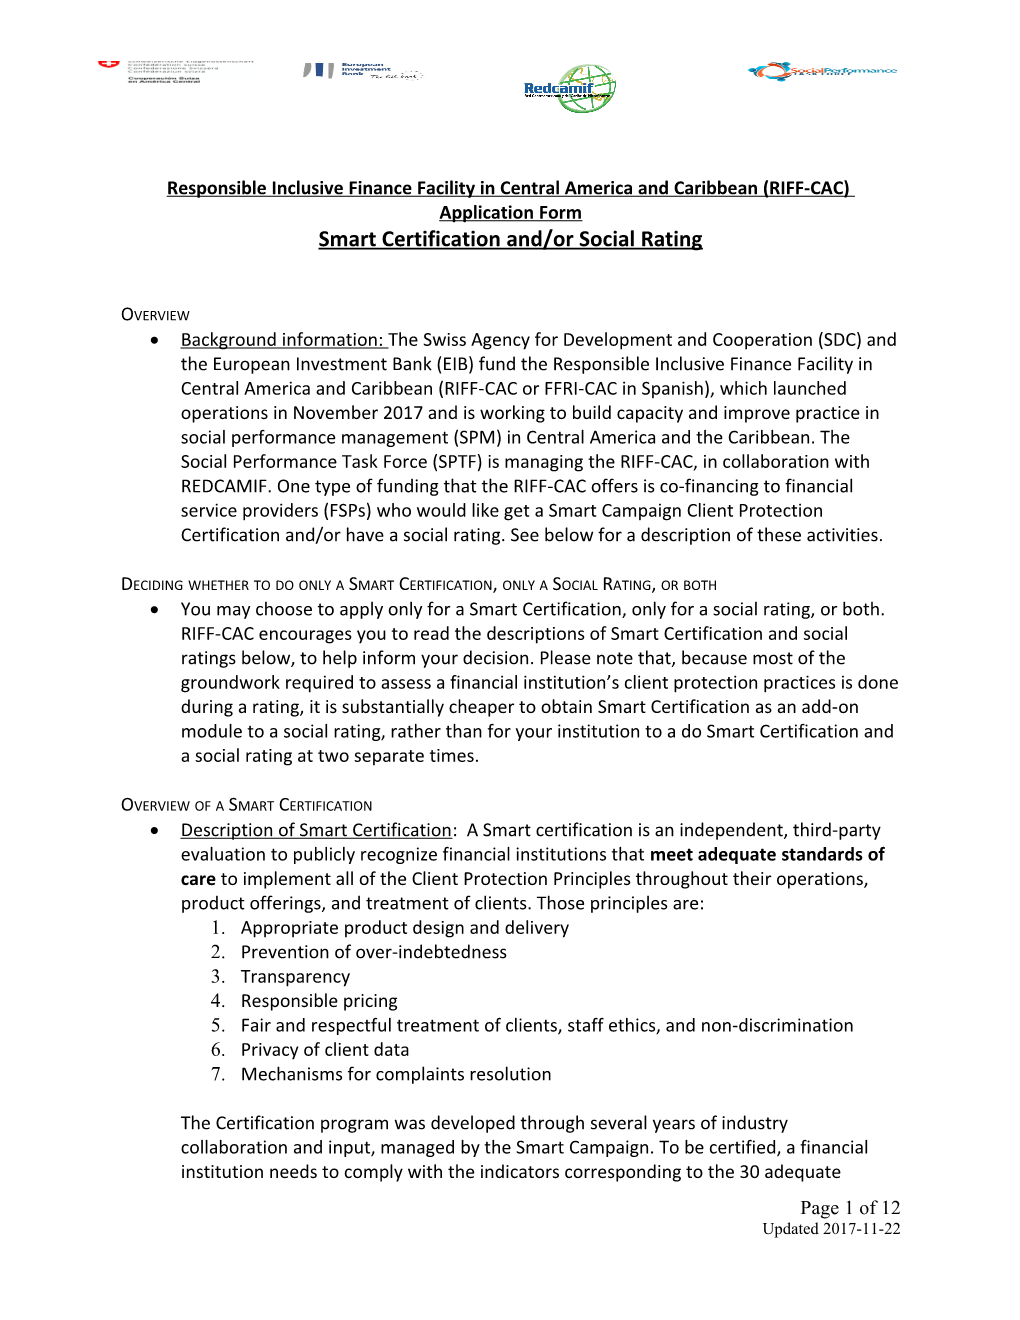 Responsible Inclusive Finance Facility in Central America and Caribbean (RIFF-CAC)